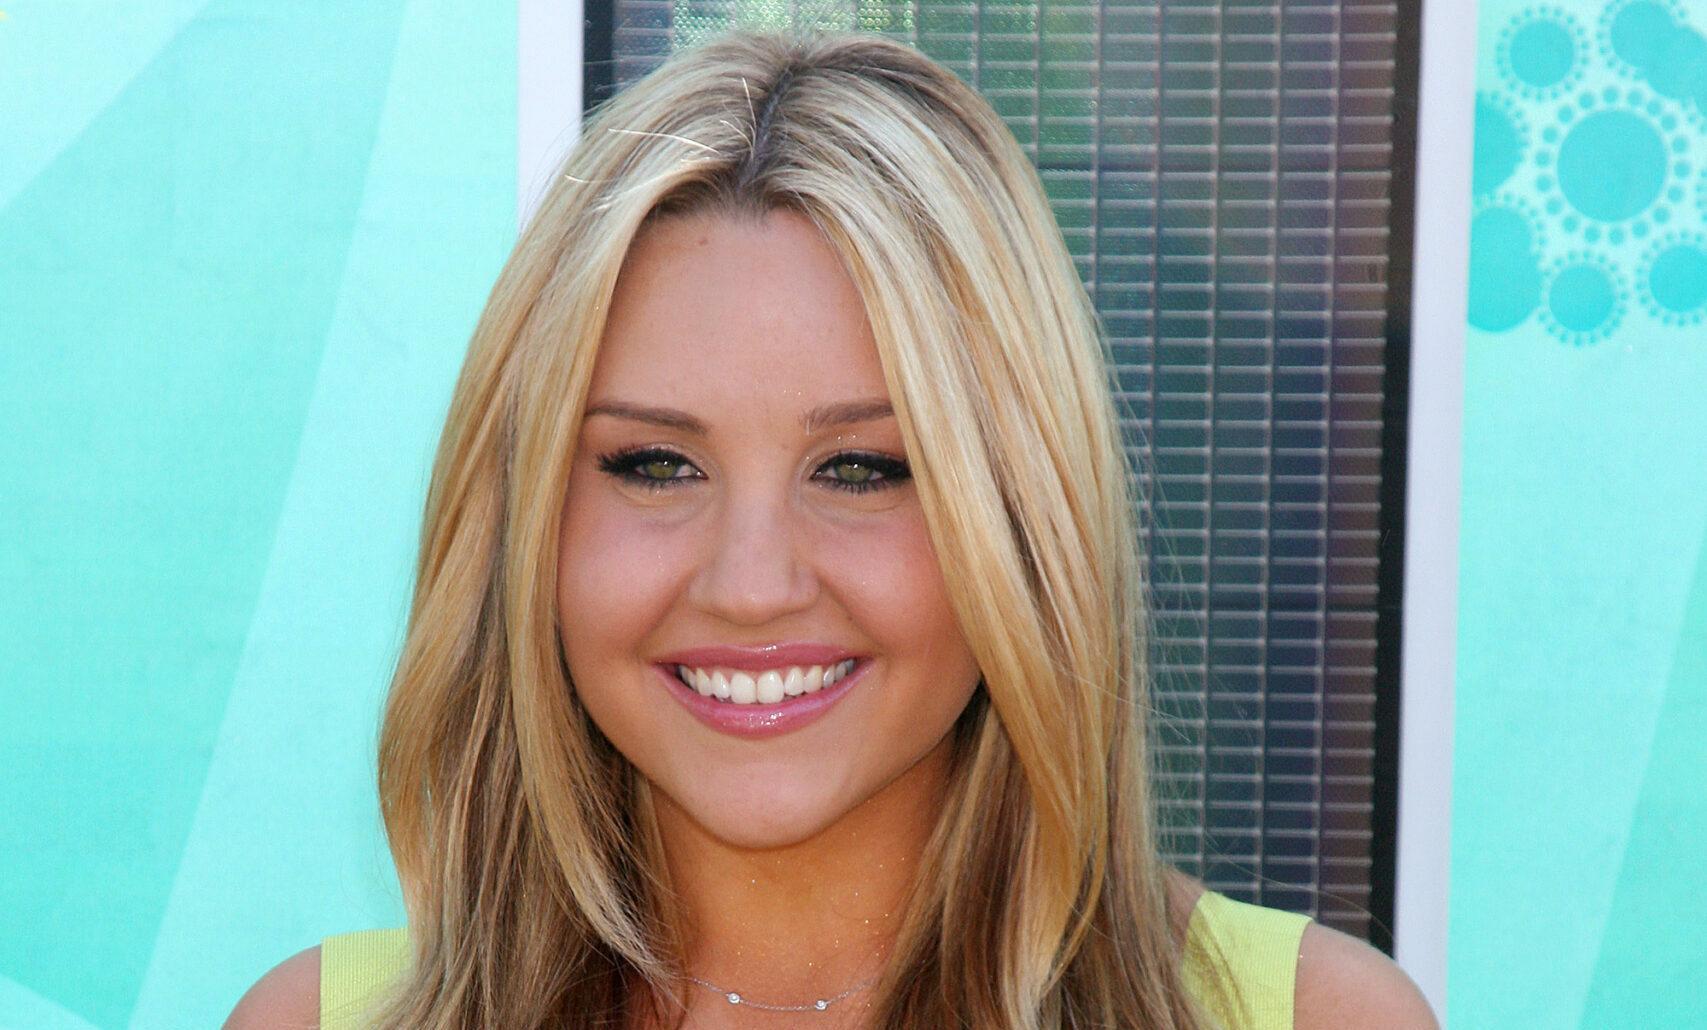 Here’s Why Amanda Bynes Left Hollywood and Acting